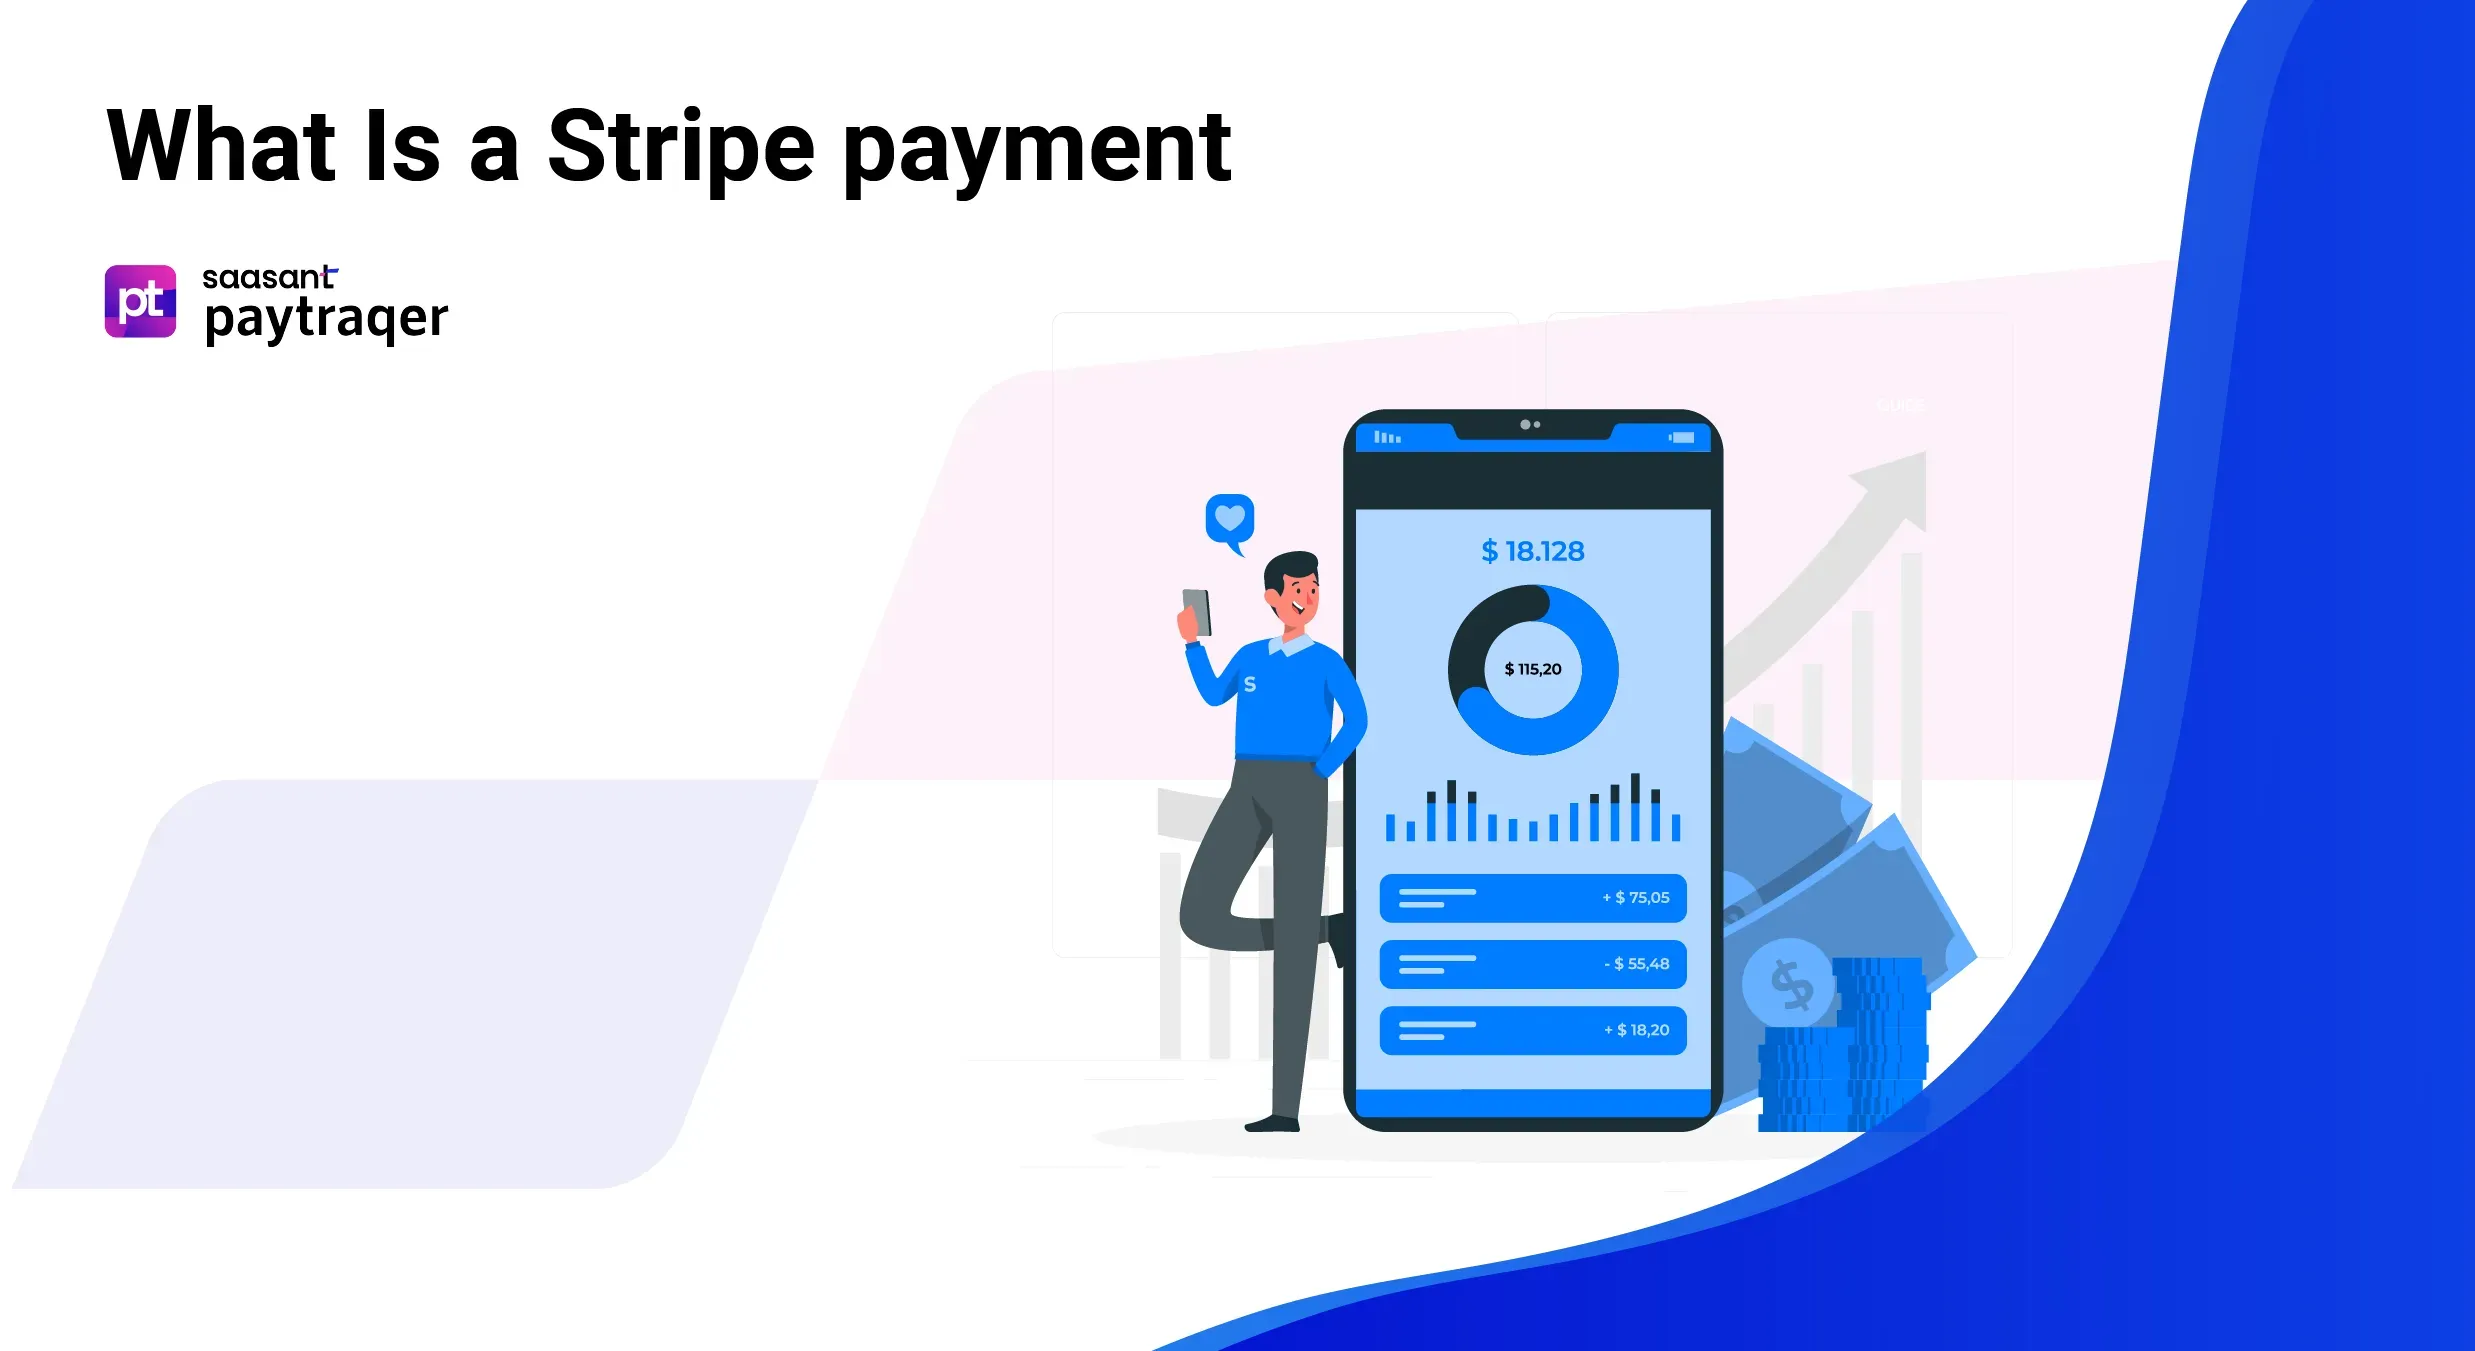 What is Stripe Payment?